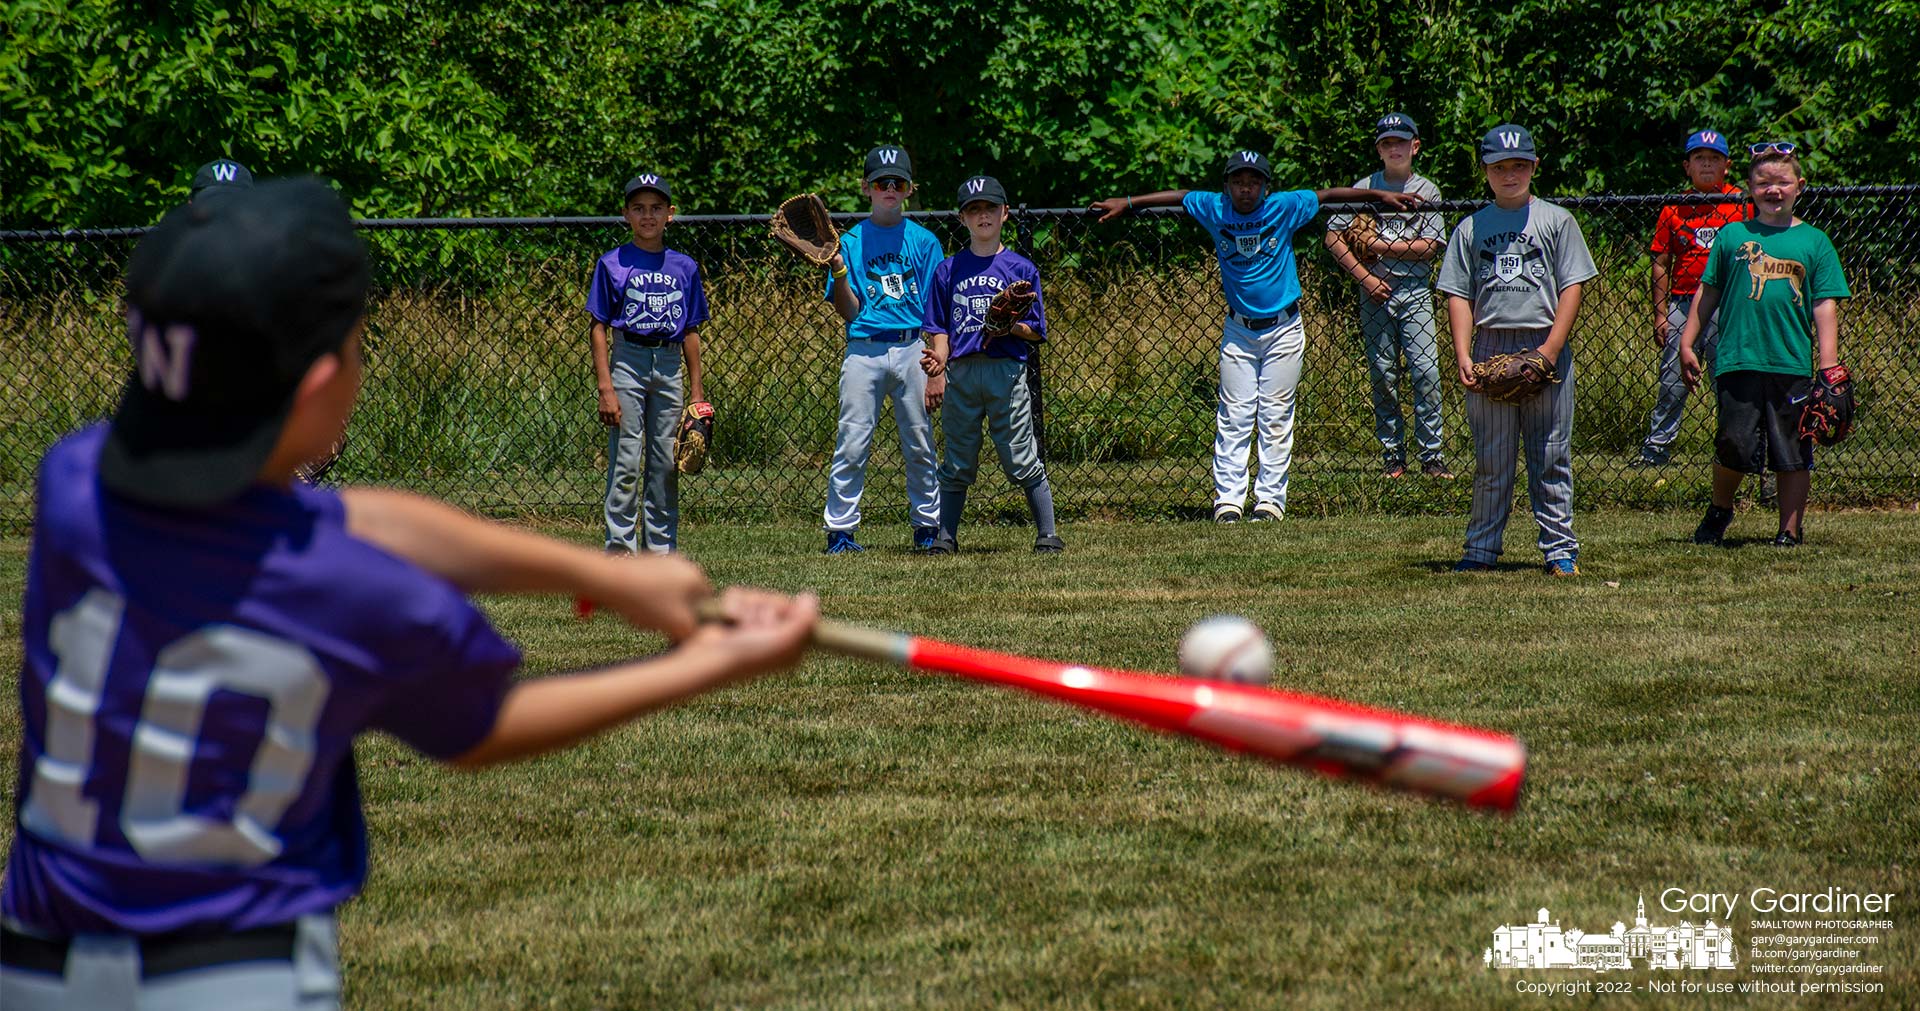 Westerville Youth Baseball and Softball League All-Star outfielders line up at the home run fence as one of their teammates swings during the home run competition at Huber Village Park Saturday afternoon. My Final Photo for July 2, 2022.